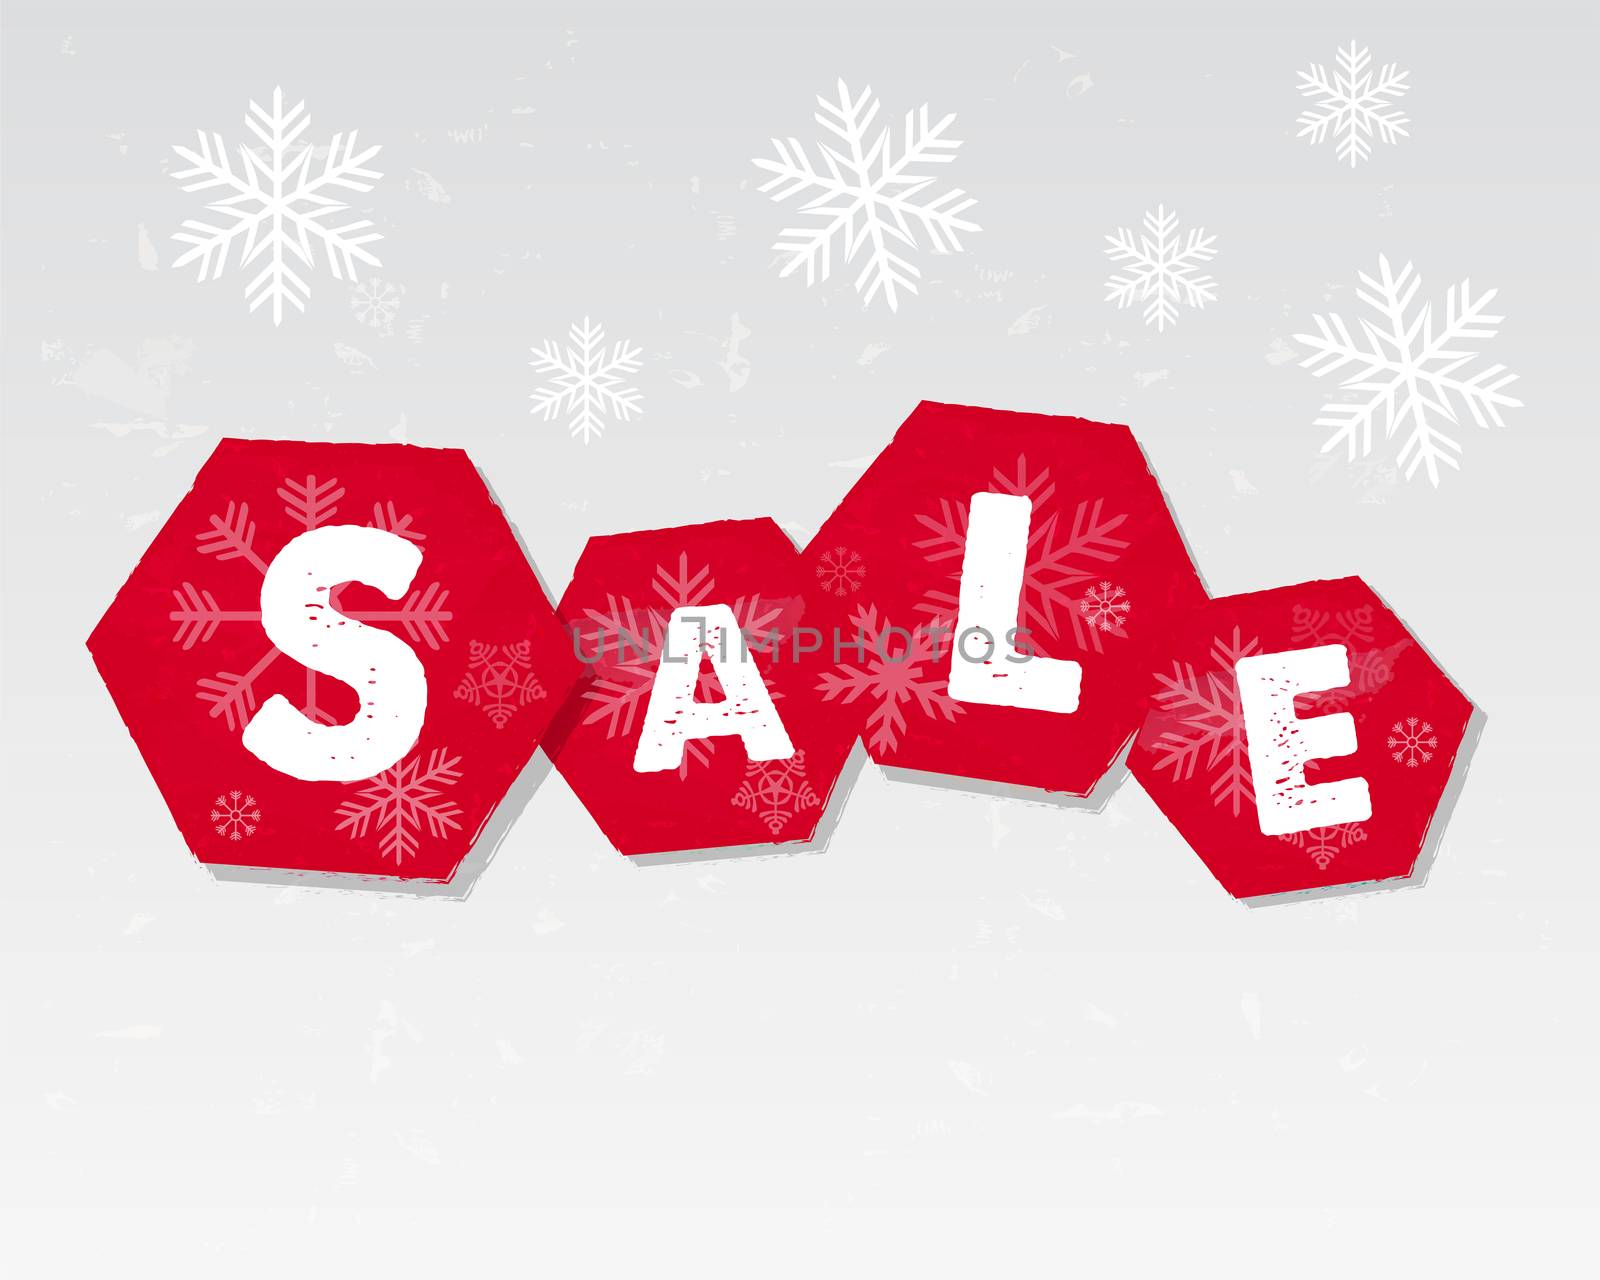 winter sale with snowflakes over white background, business seasonal shopping concept